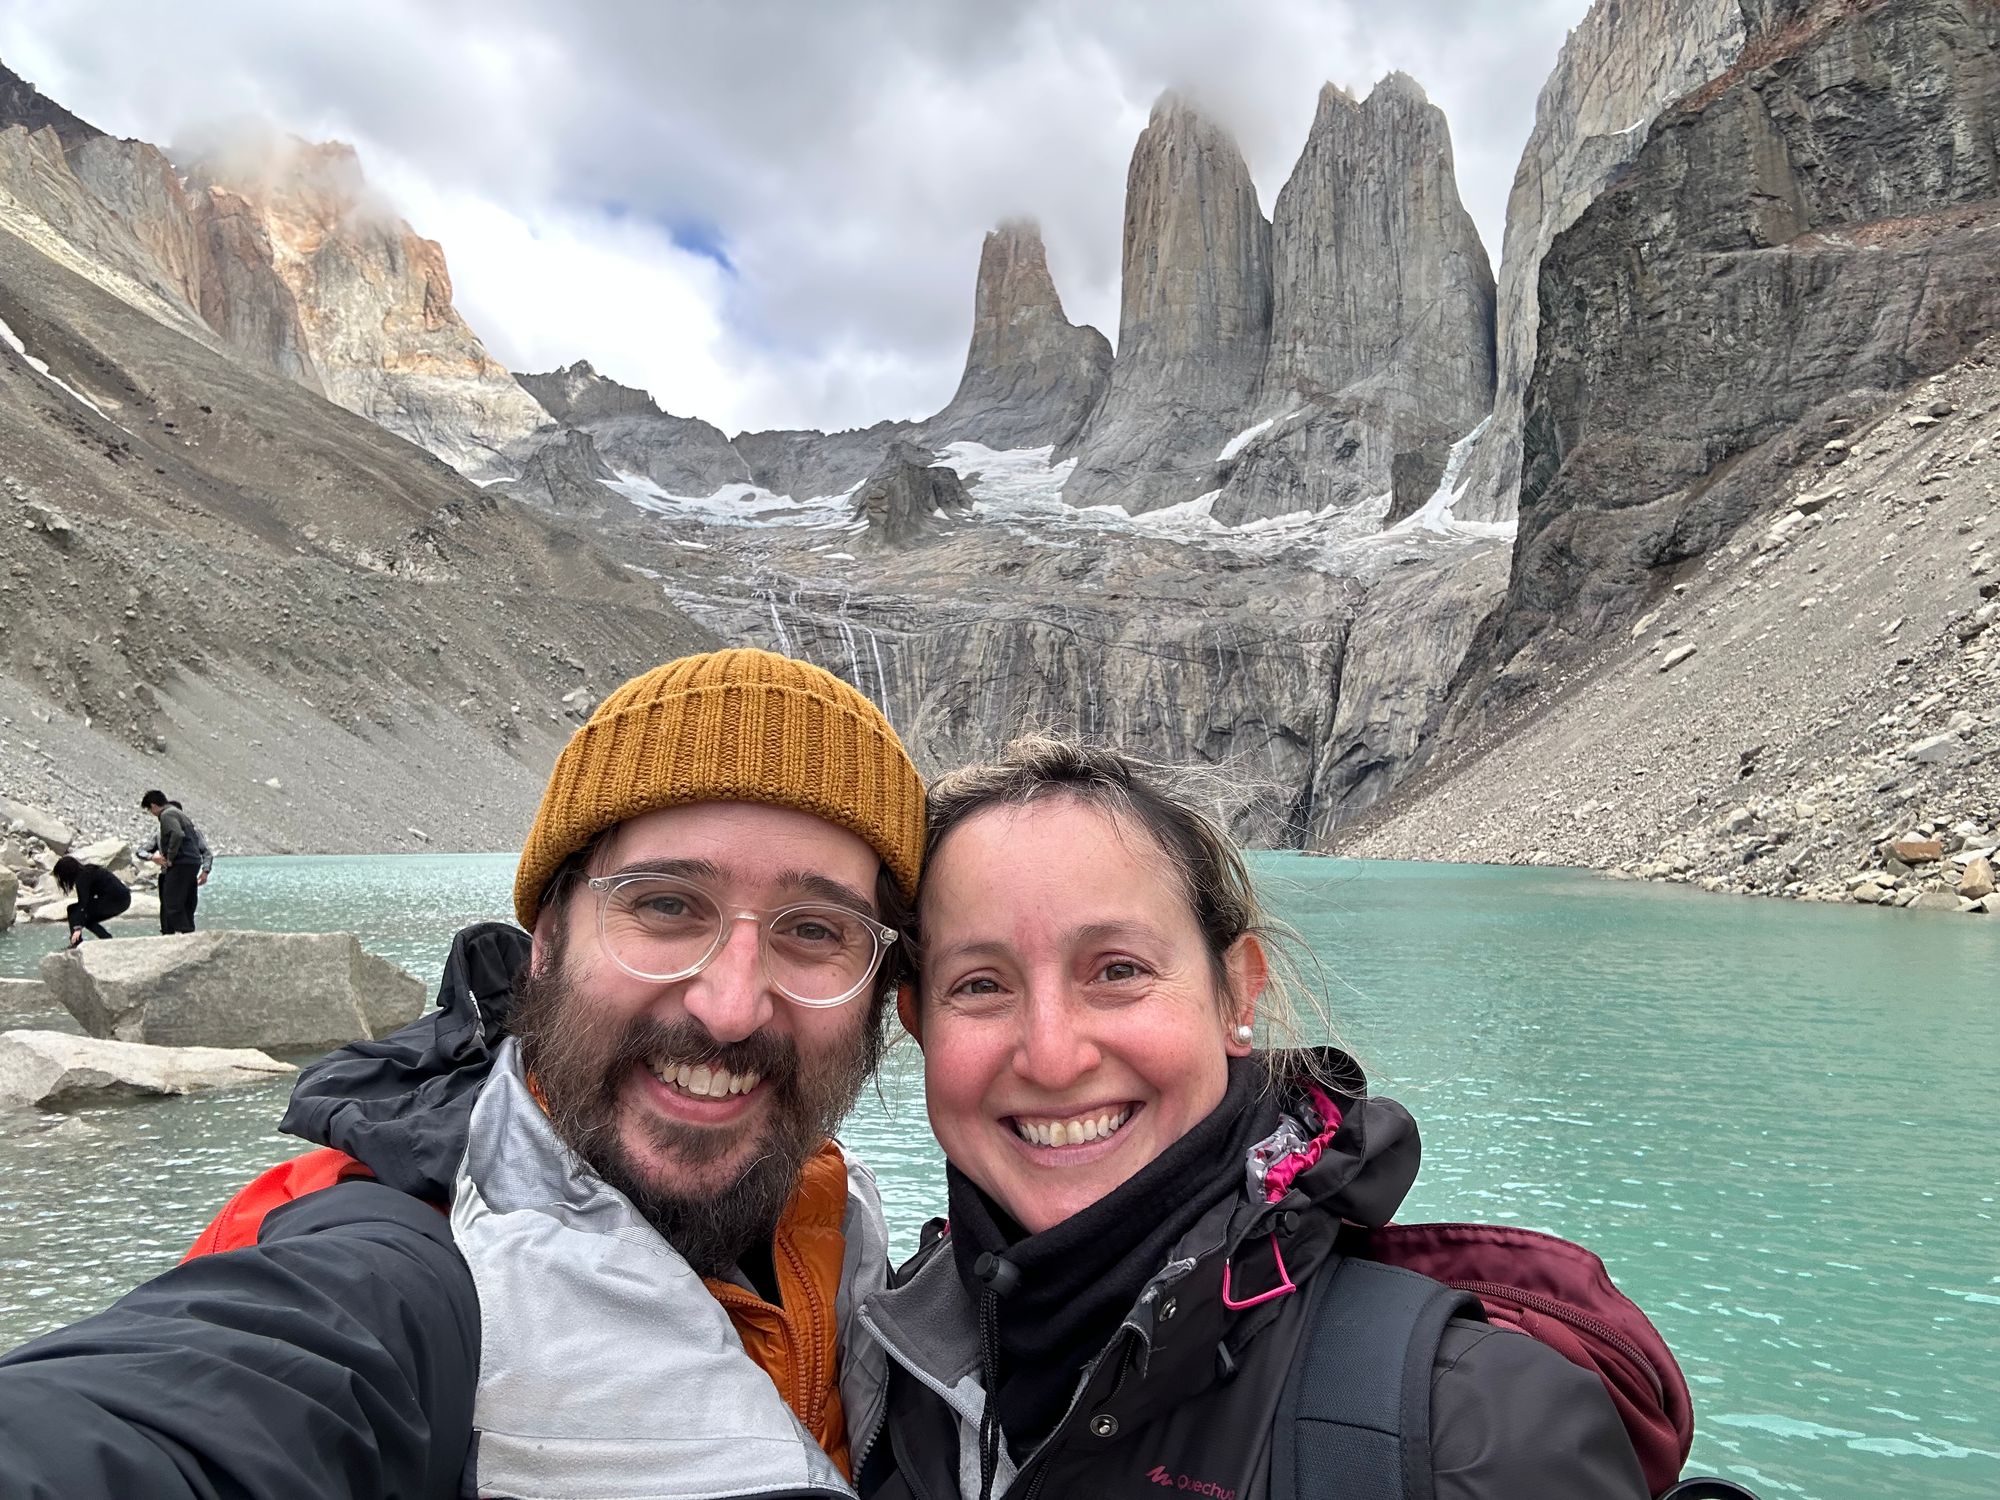 A Patagonian love story